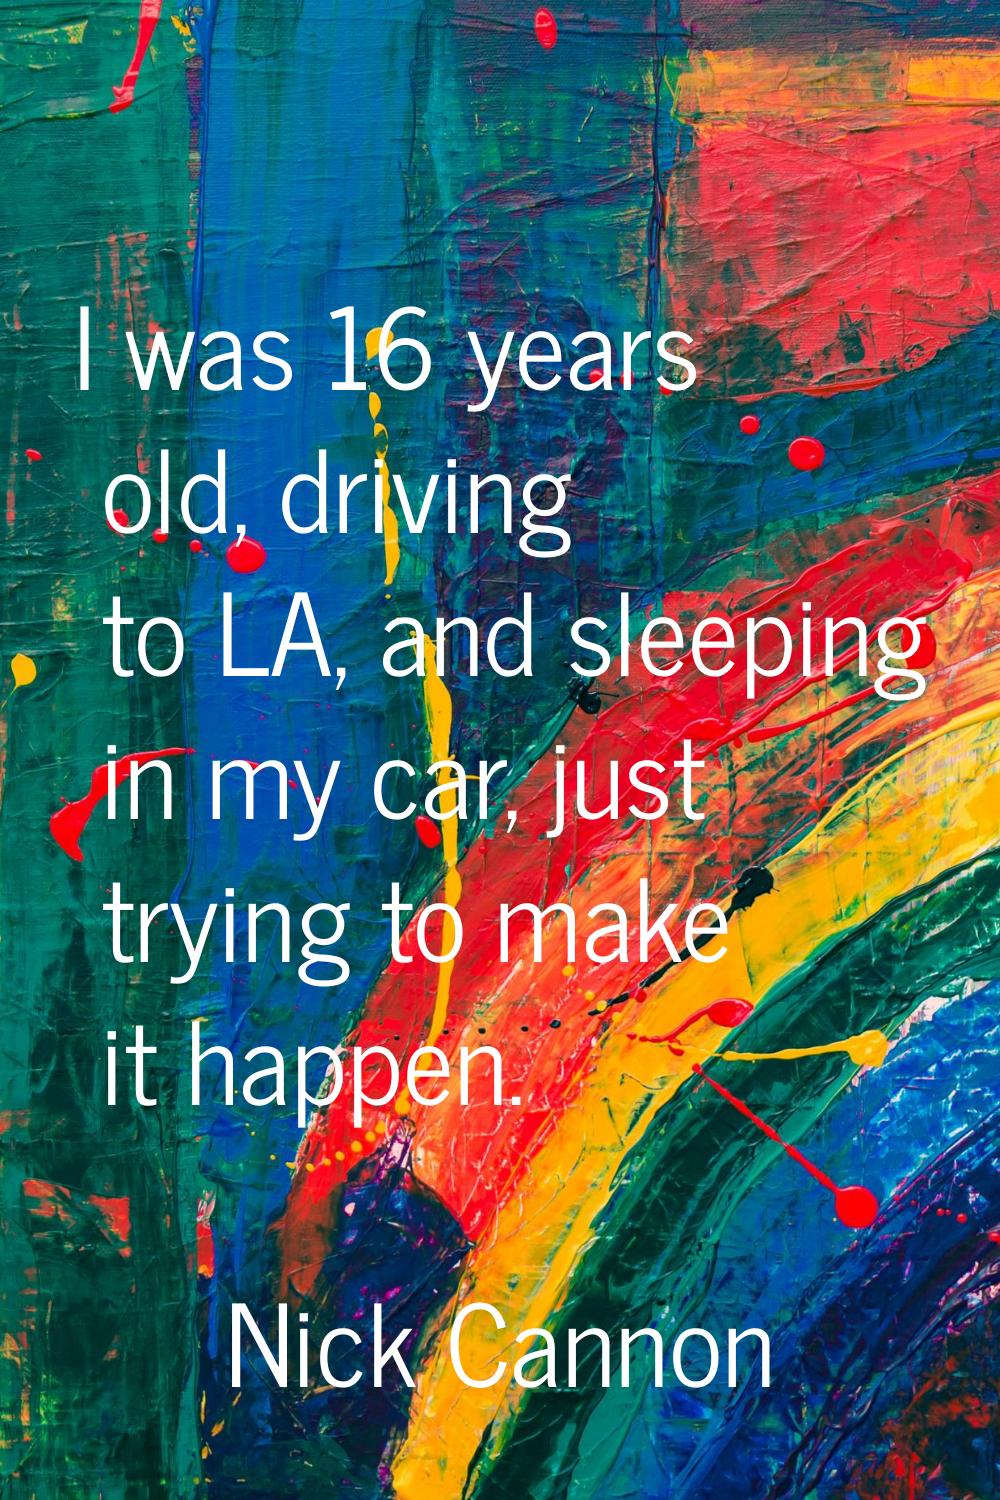 I was 16 years old, driving to LA, and sleeping in my car, just trying to make it happen.